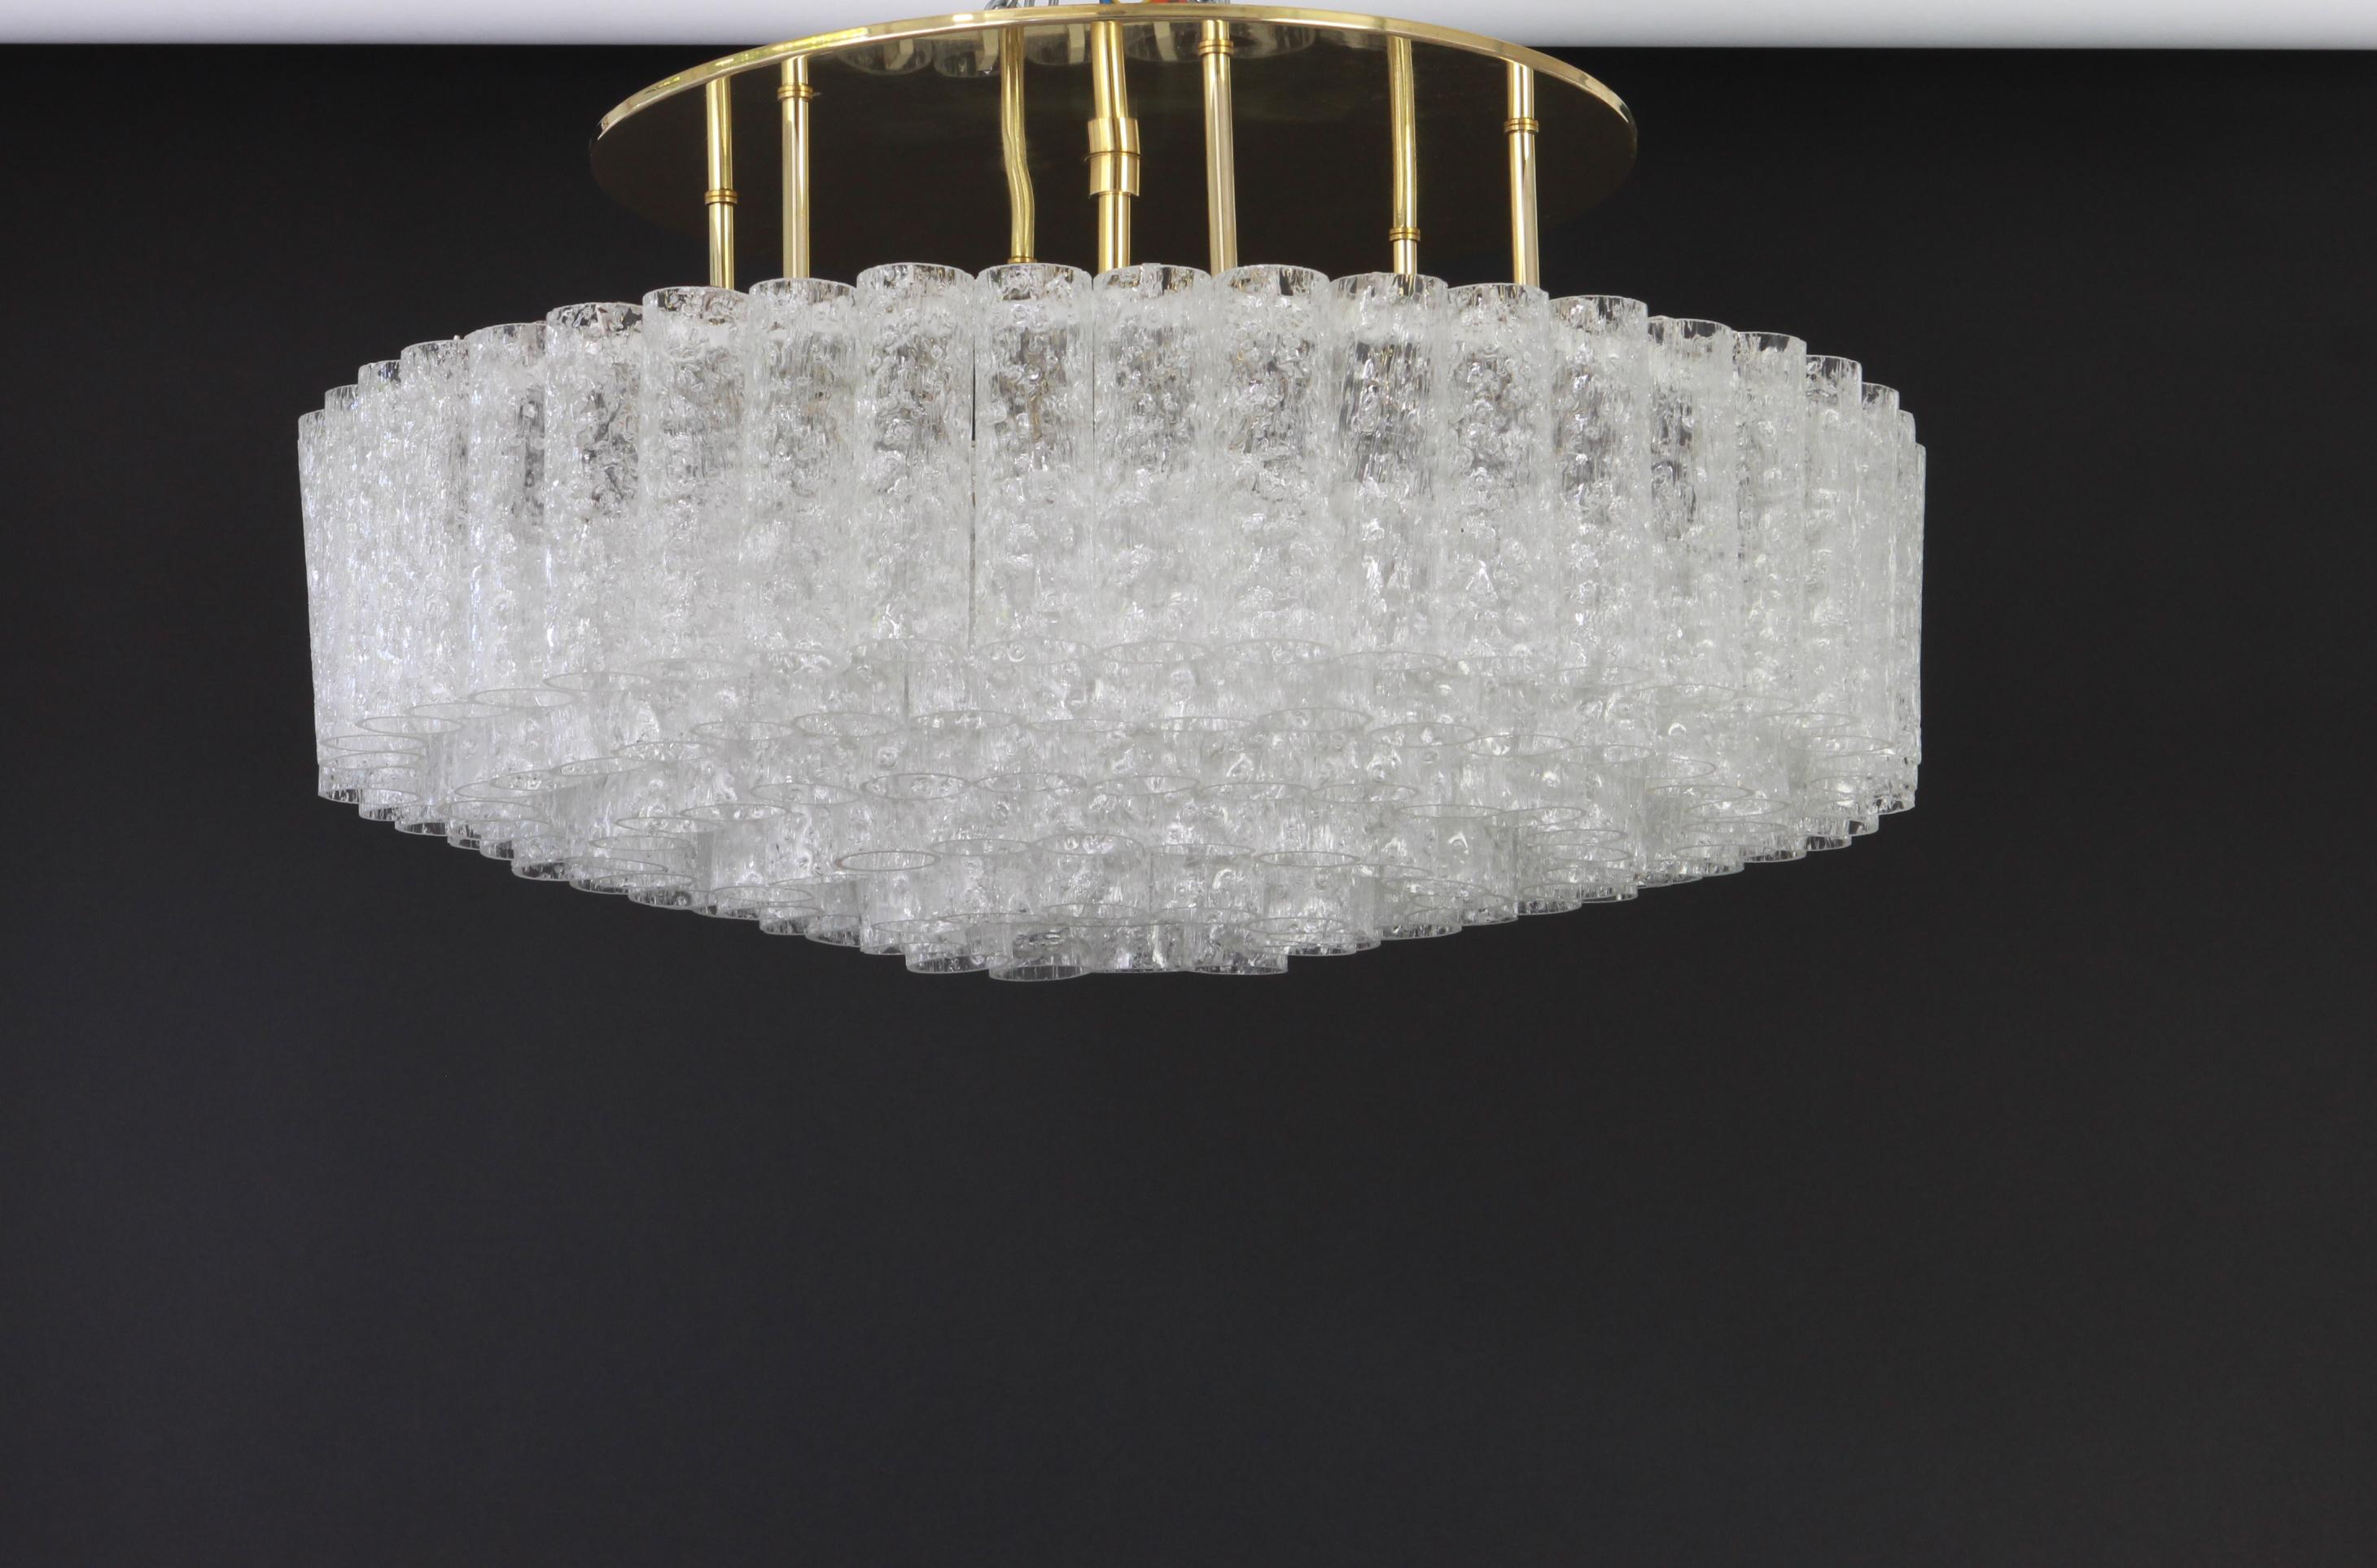 Fantastic five-tier midcentury chandelier by Doria, Germany, manufactured circa 1960-1969. Five rings of Murano glass cylinders suspended from a fixture.

Sockets: 12 x E14 candelabra bulbs //Max.40 watt each + 1 x E27 standard Bulb (60